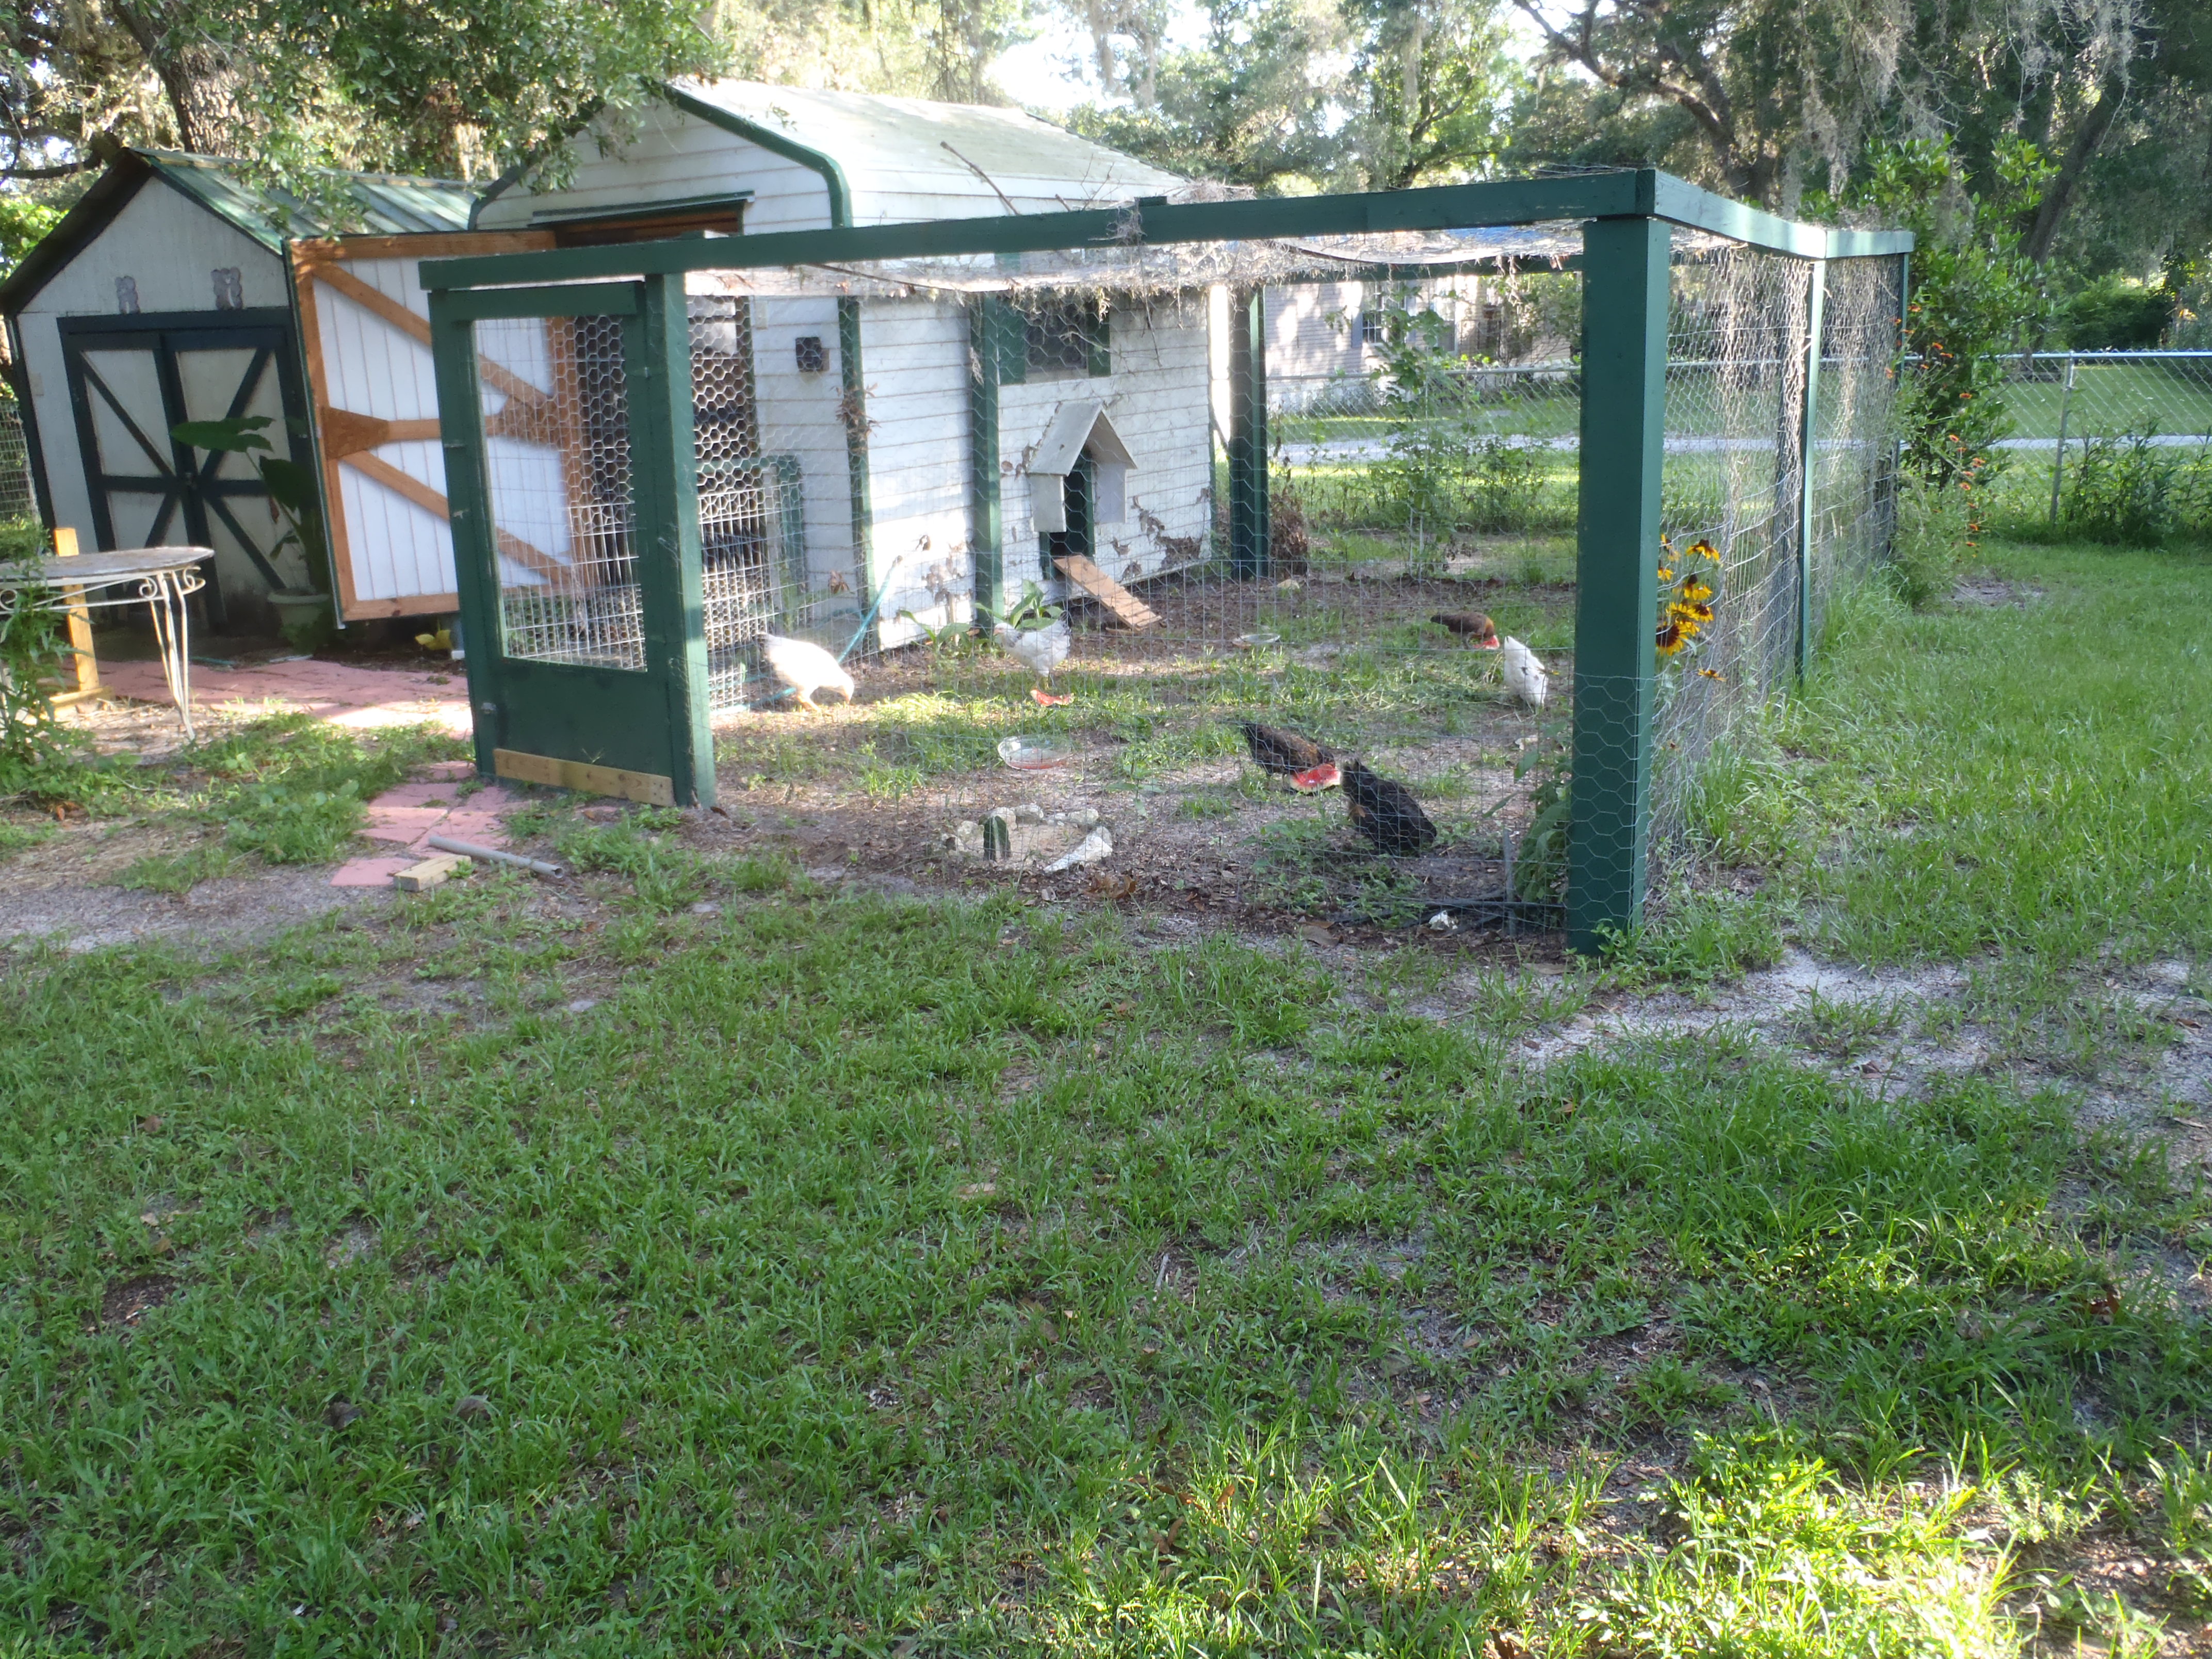 This is my Chicken house and run. I am allowed 6 total and no rooster.